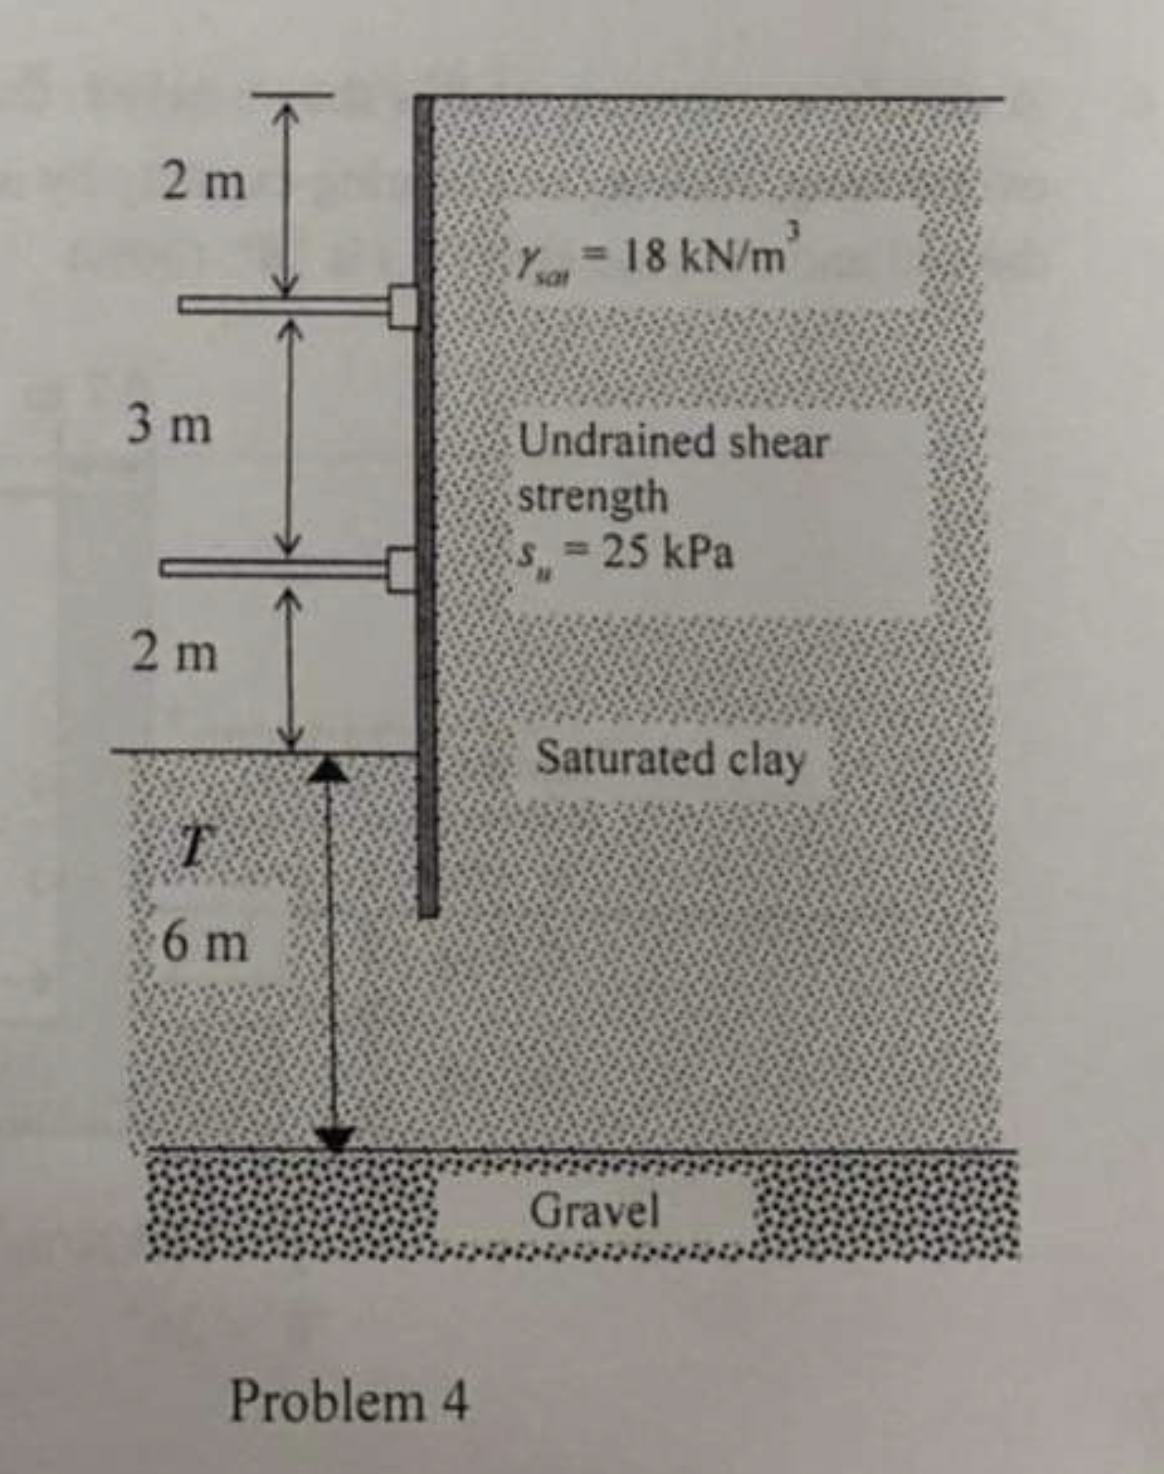 2 m
= 18 kN/m
%3D
3 m
Undrained shear
strength
= 25 kPa
2 m
Saturated clay
6 m
Gravel
Problem 4
